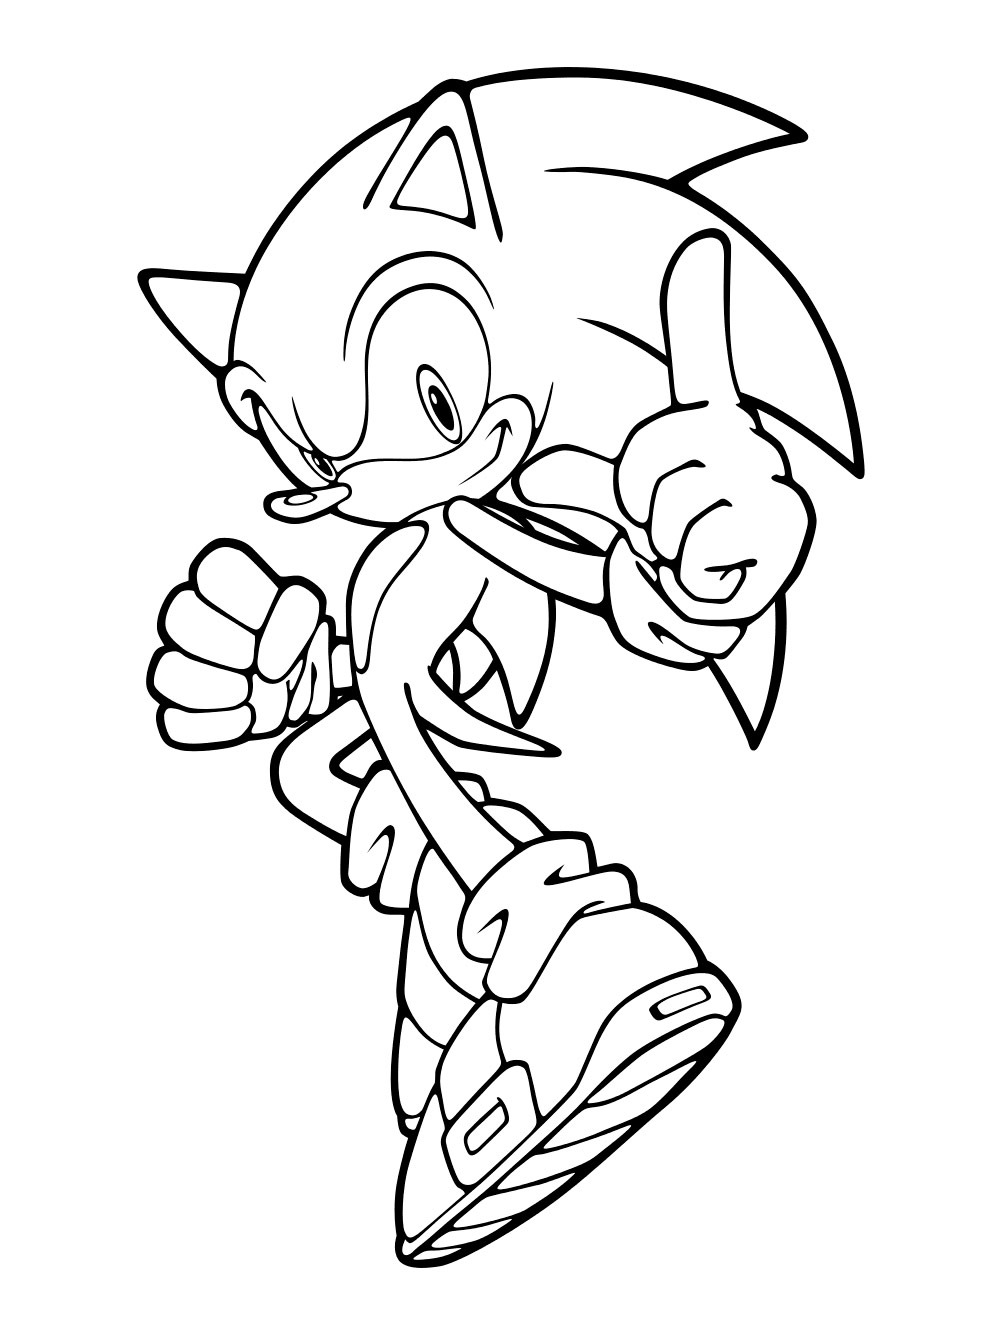 Super sonic the hedgehog coloring pages free